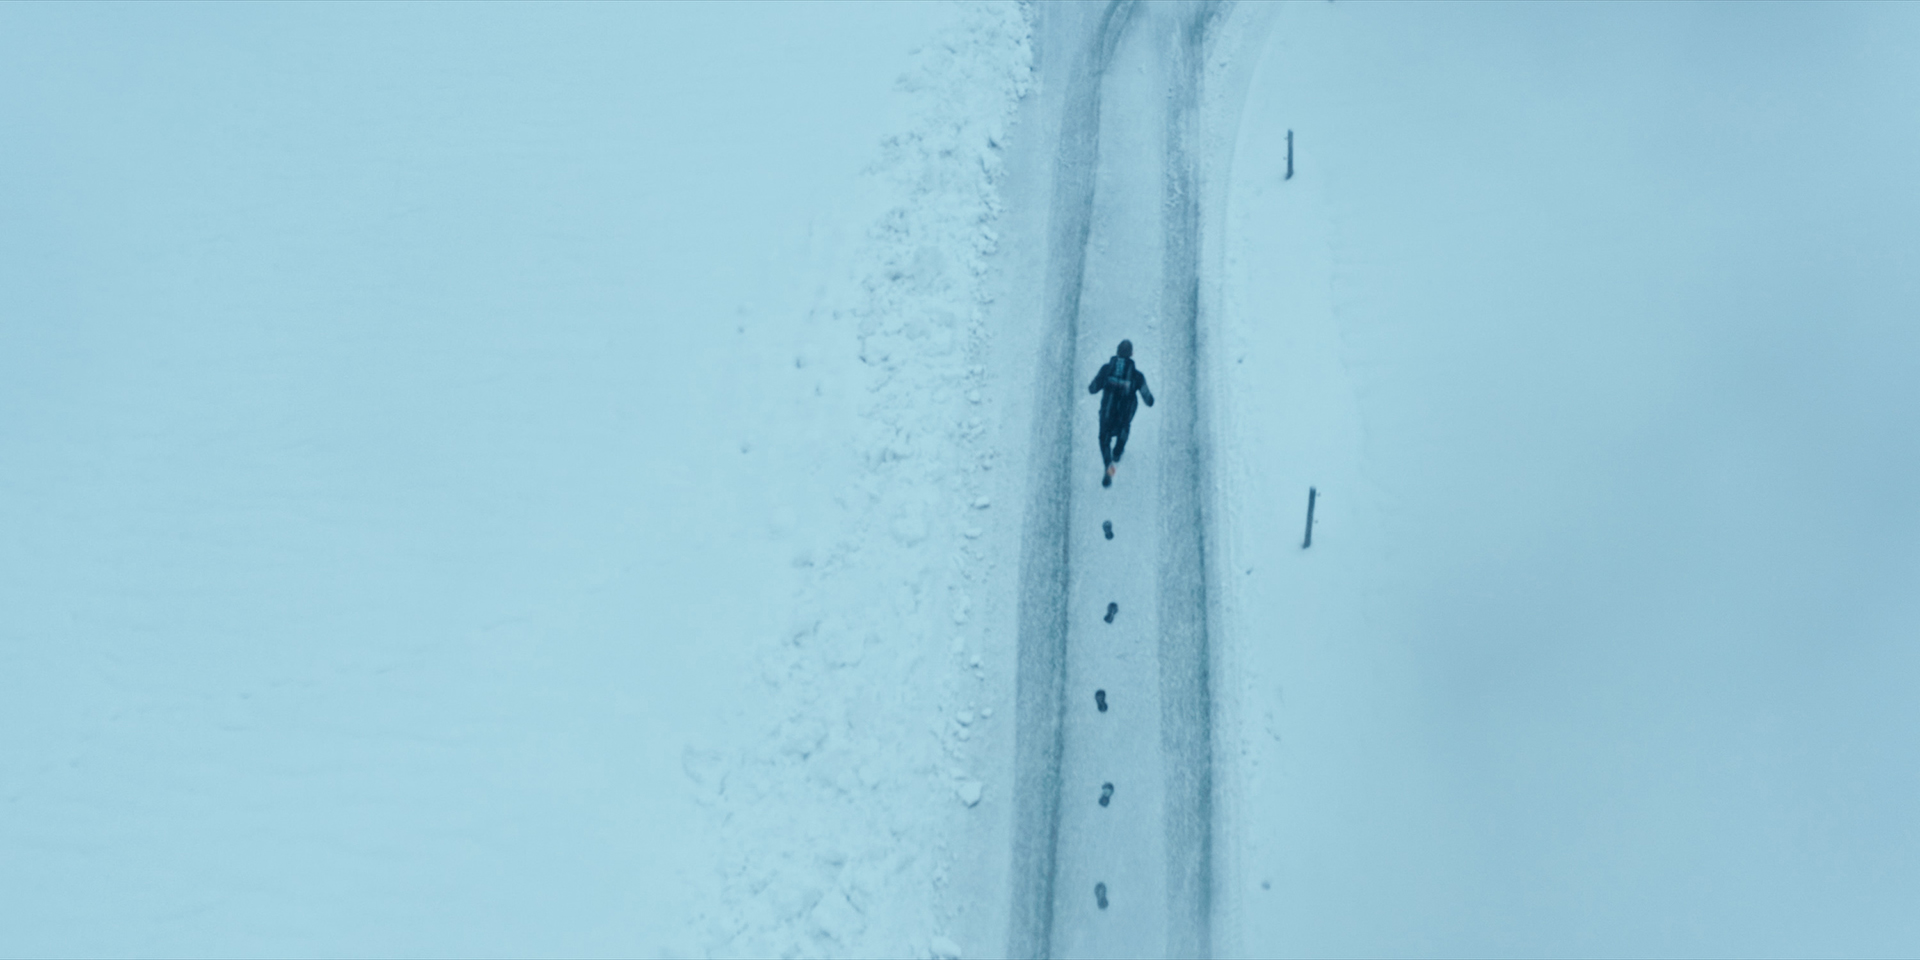 Making of the Navalny Documentary - Navalny runs in the snowy forest, captured from the drone